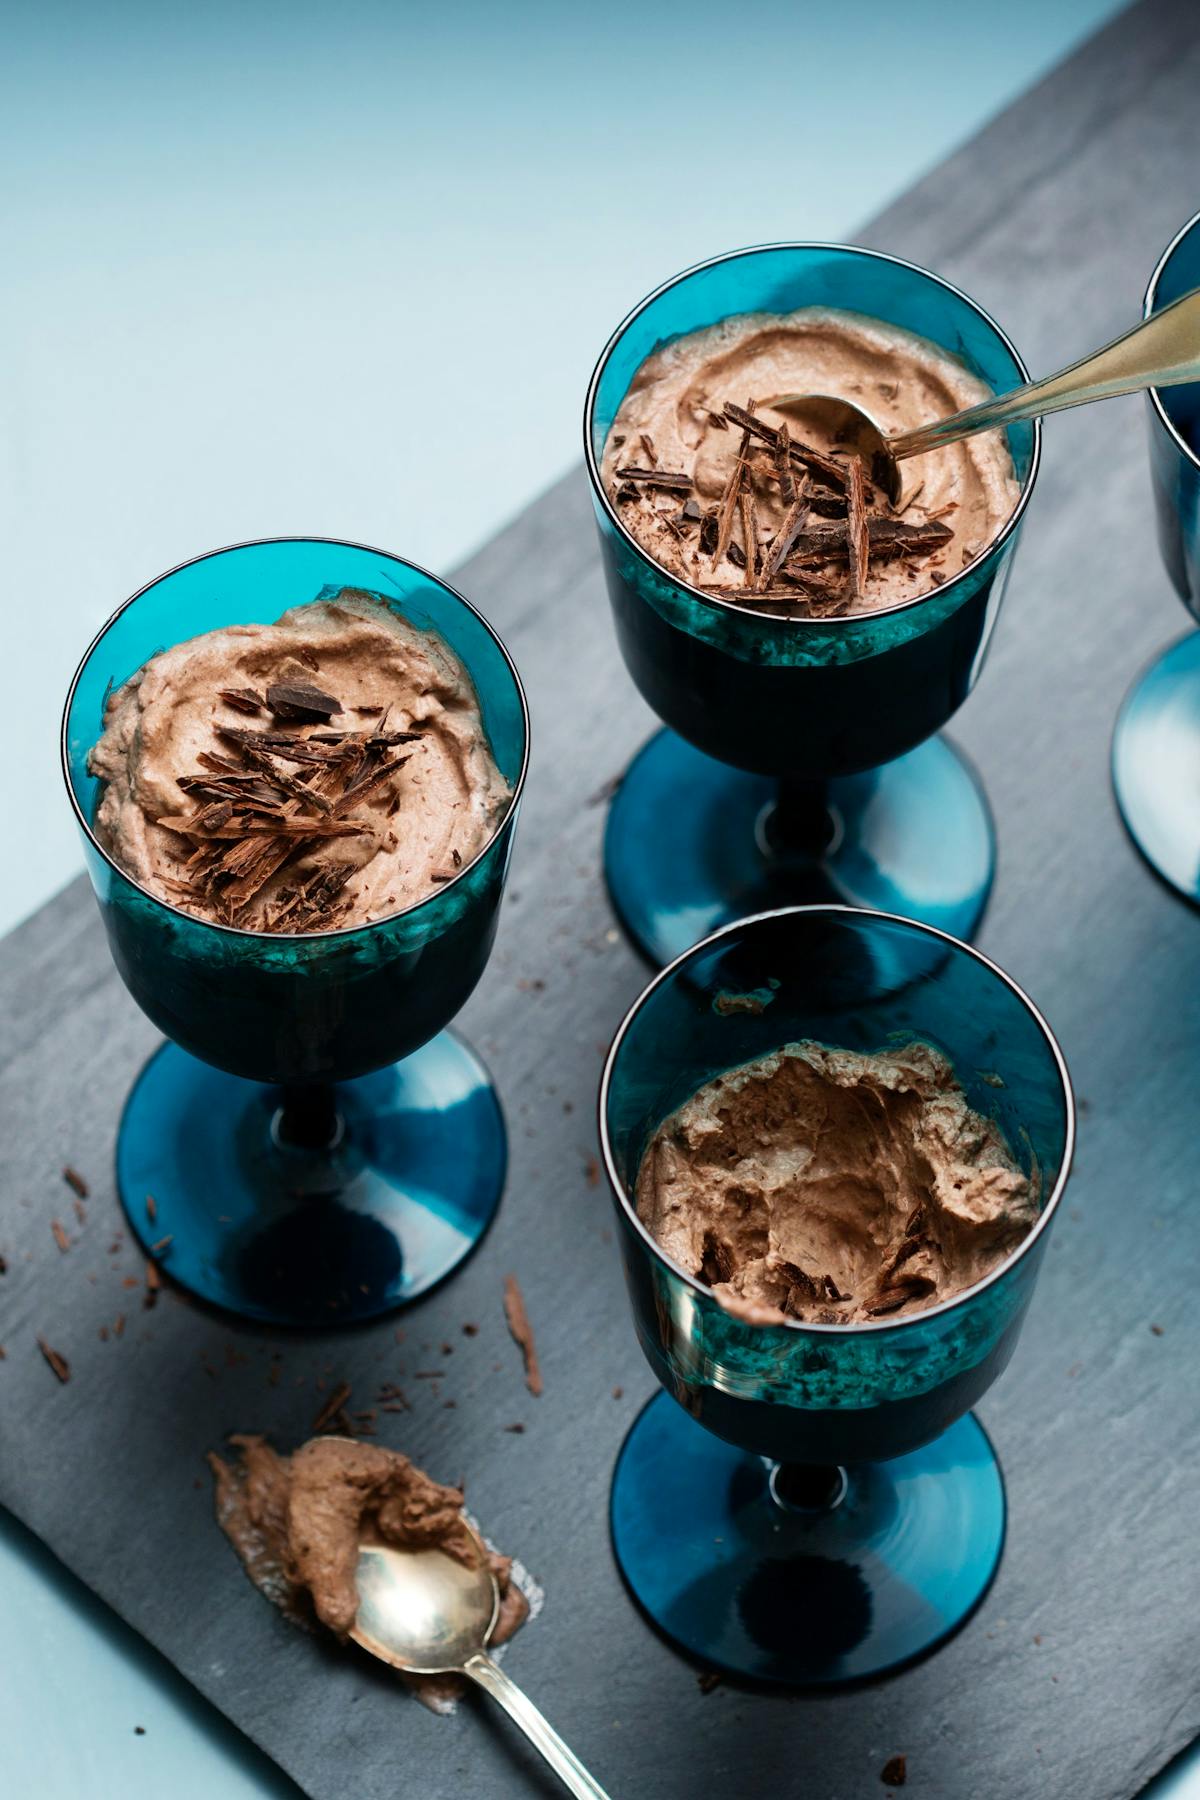 Low carb chocolate mousse